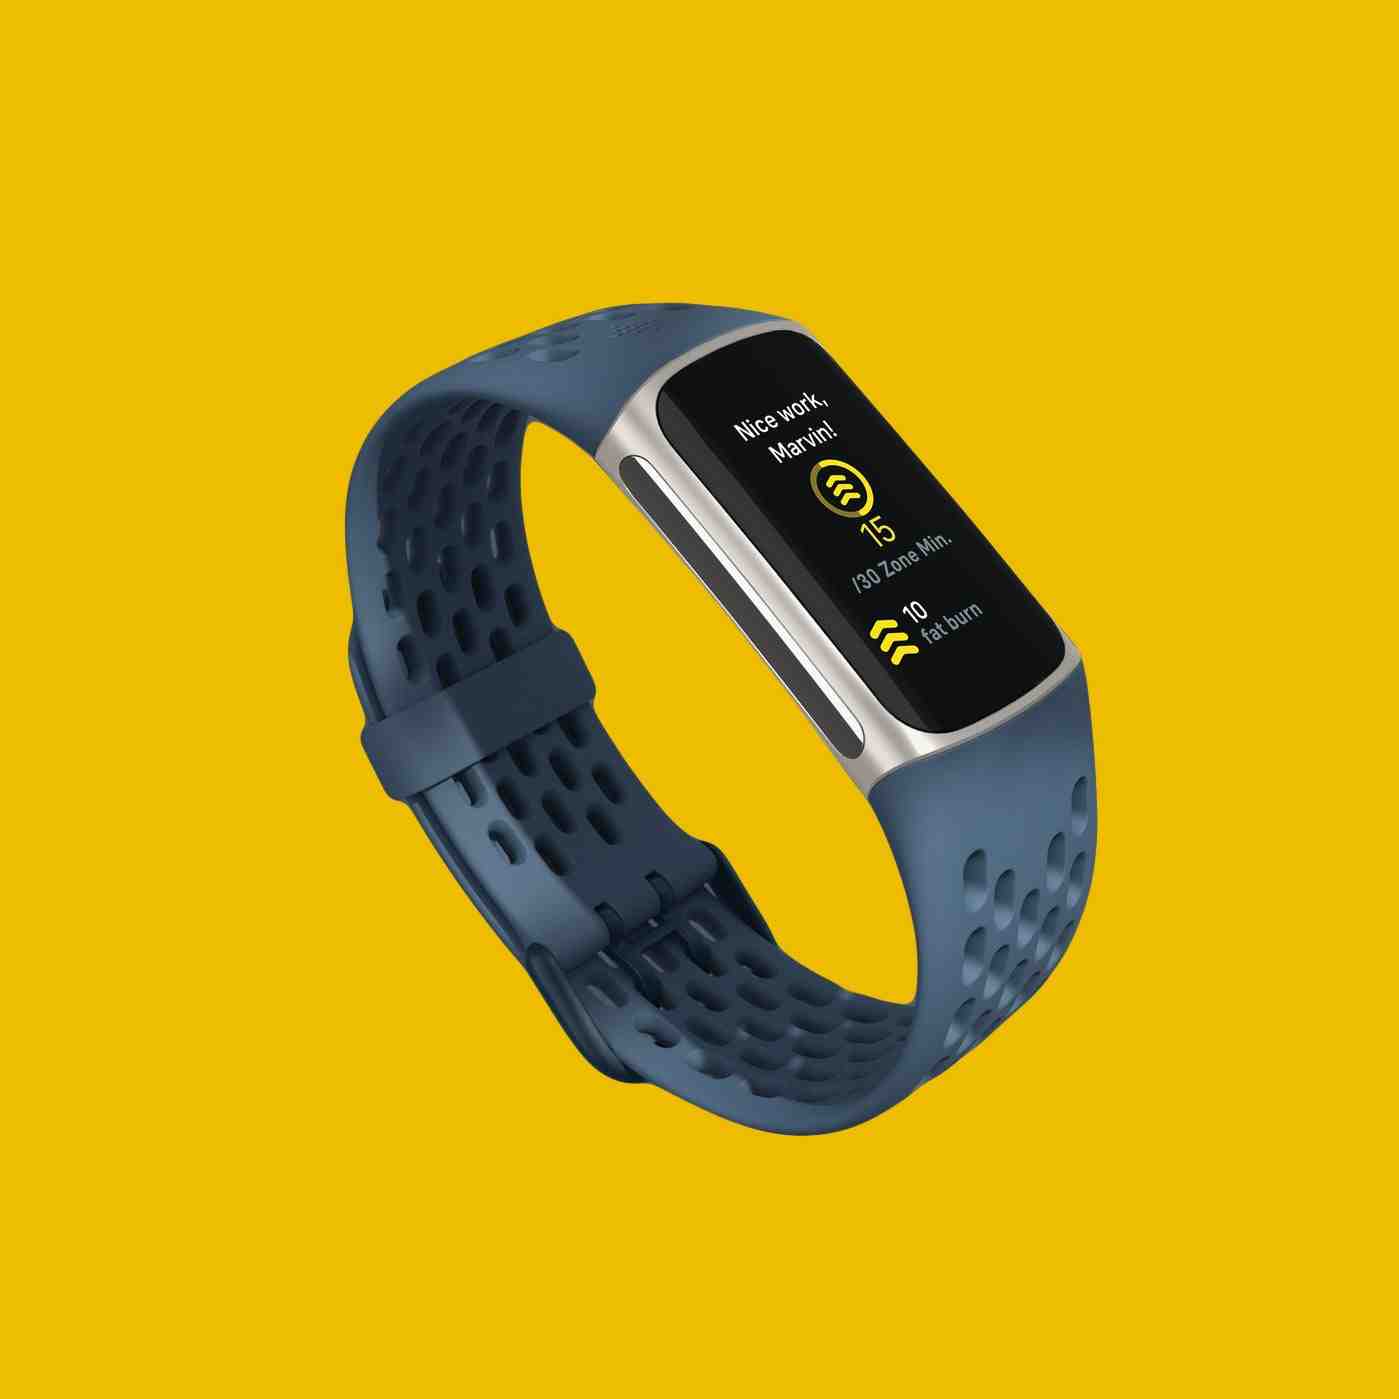 Whats the difference between Fitbit free and premium?